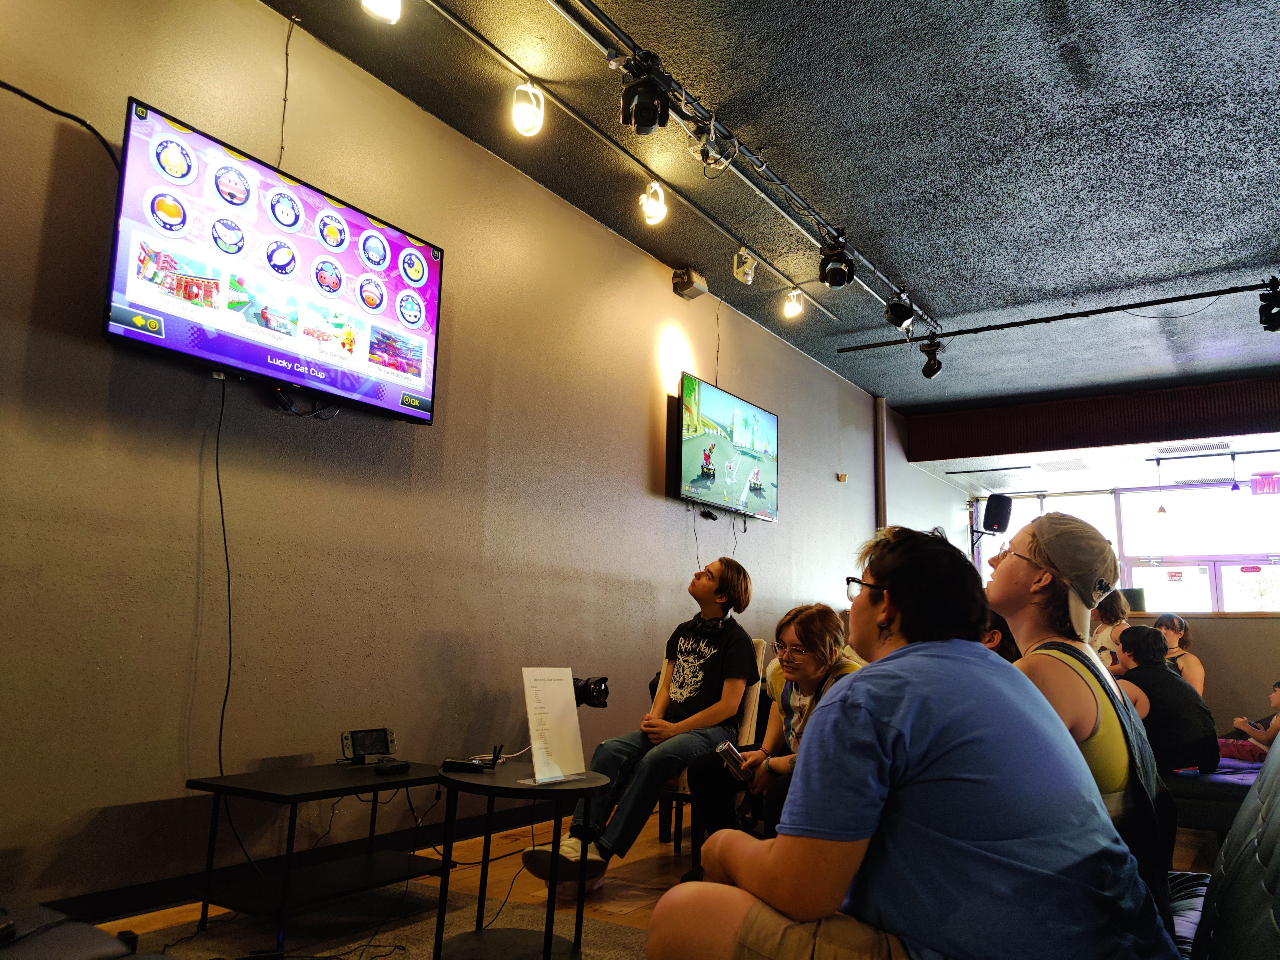 (PHOTOS) Video avid gamers in finding house for esports event, big-screen gaming in downtown Casper